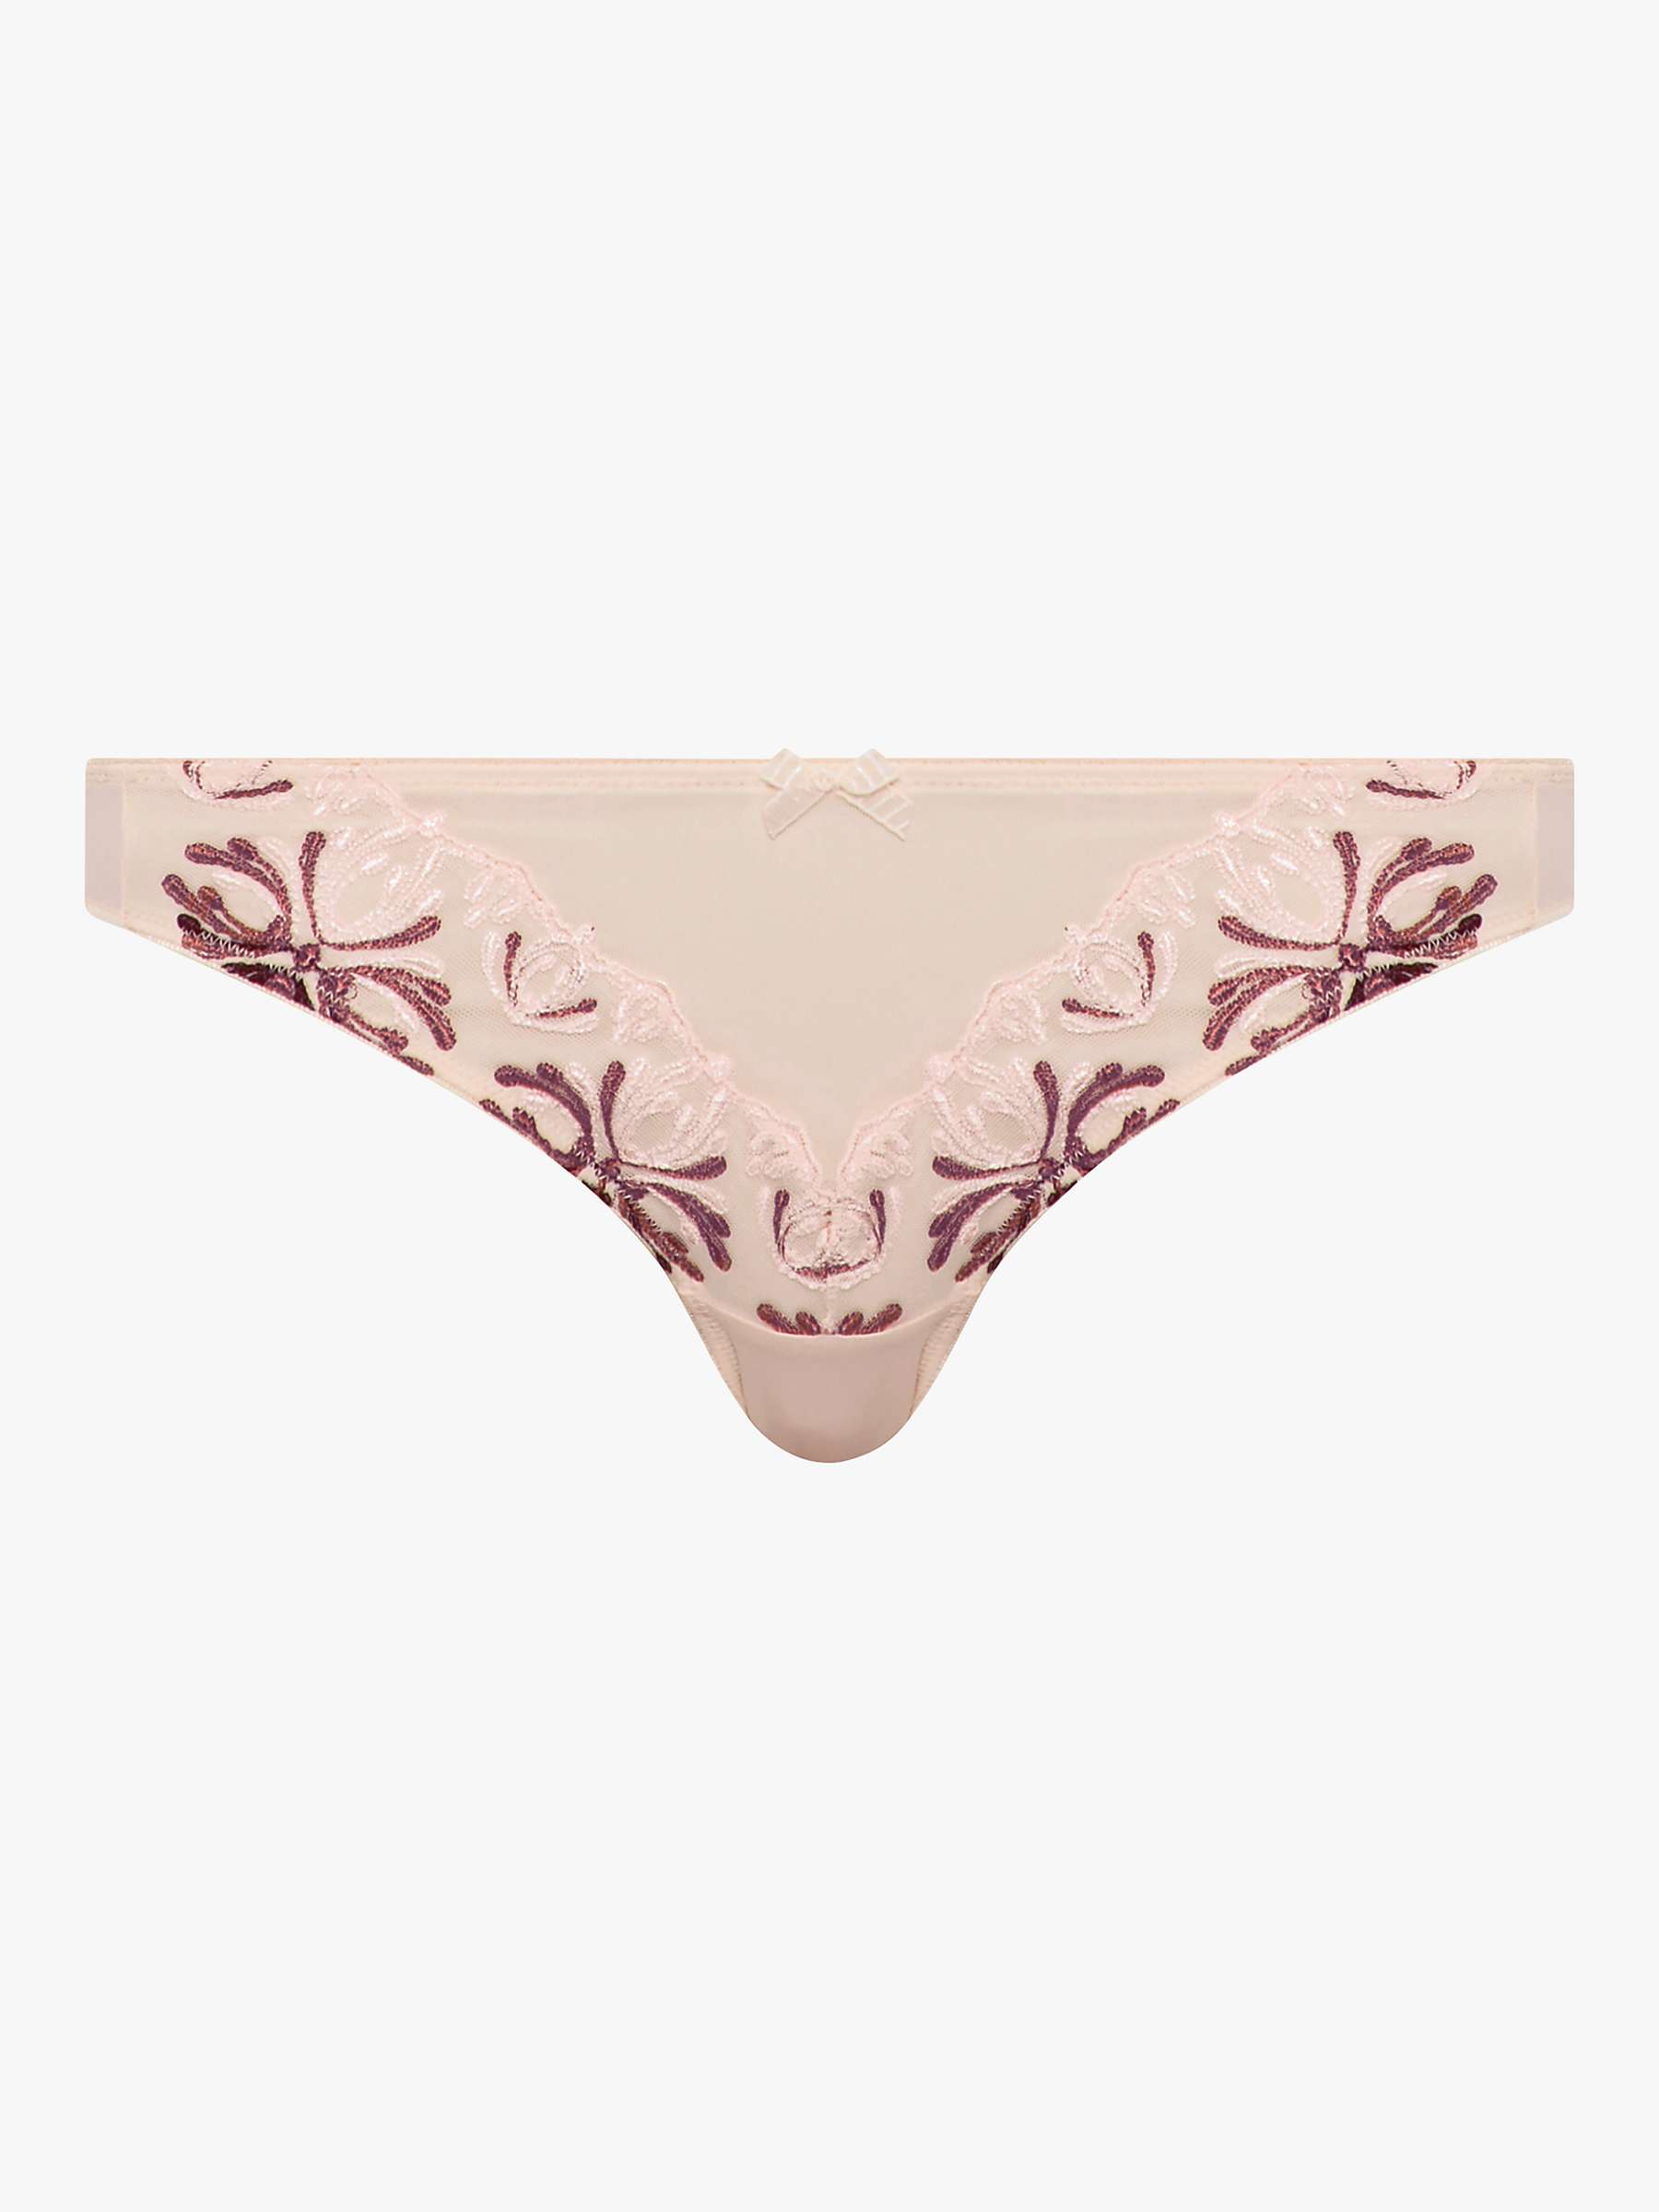 Buy Chantelle Champs Elysees Embroidered Brazilian Knickers Online at johnlewis.com